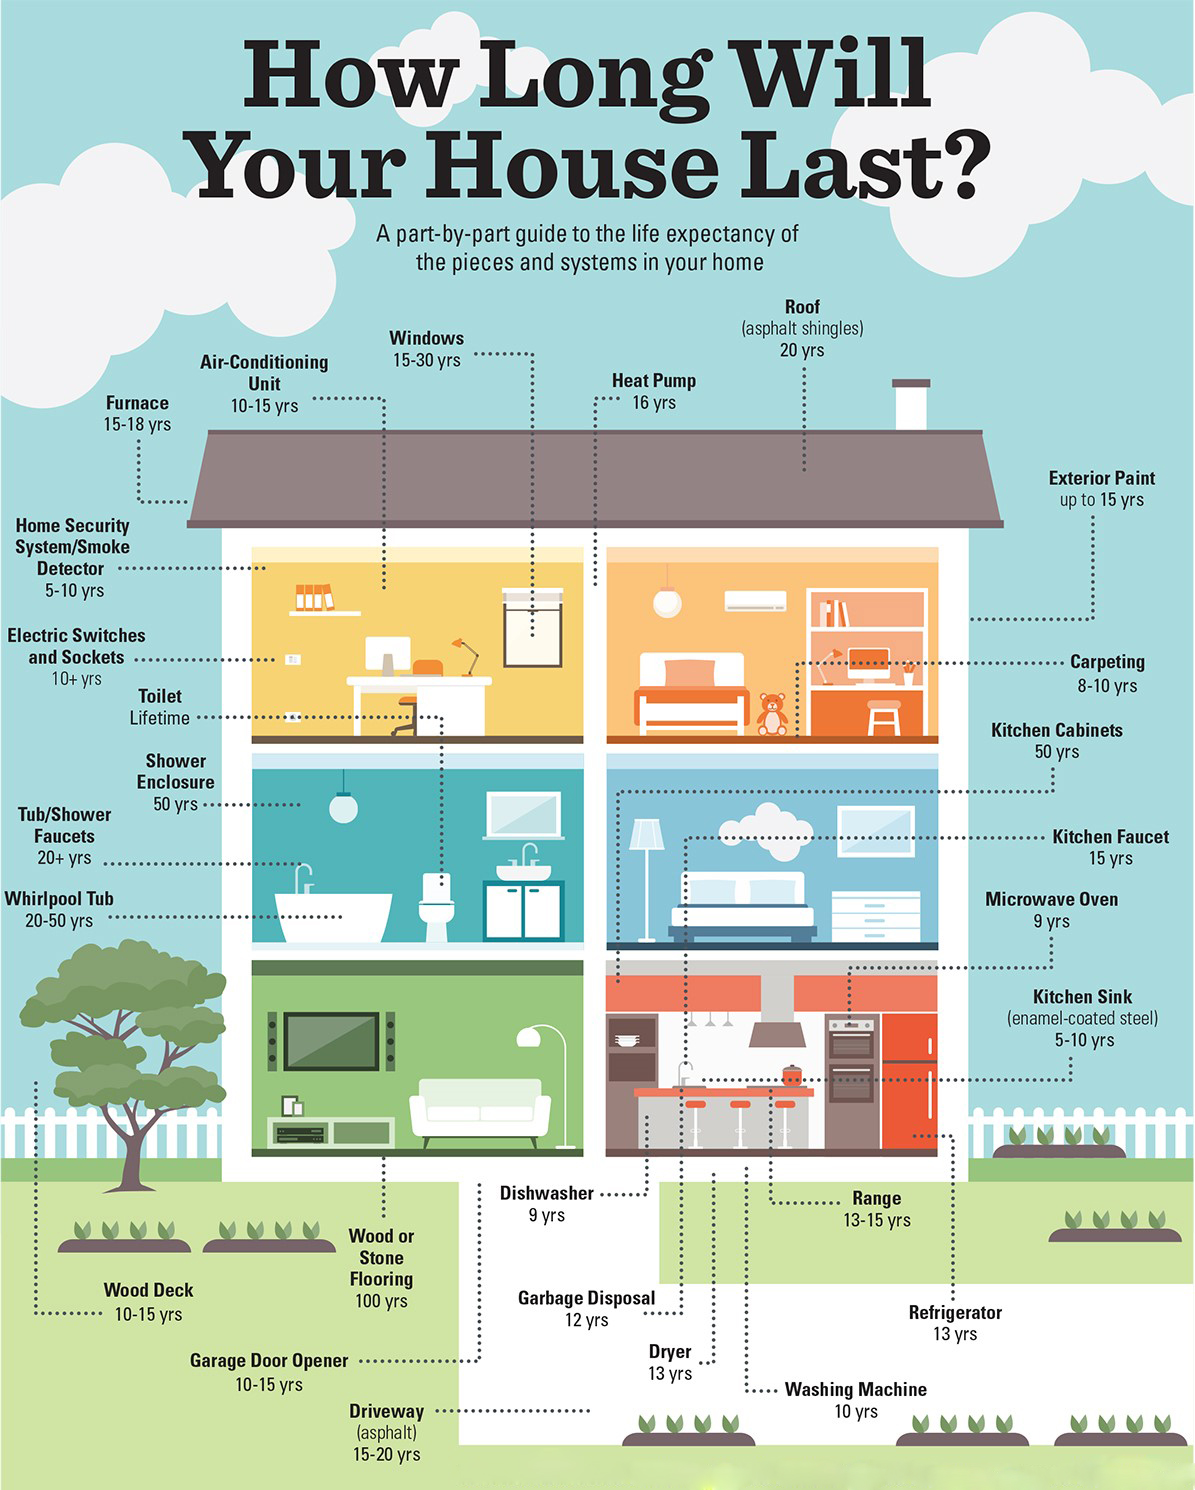 How Long Will Your House Last.jpg